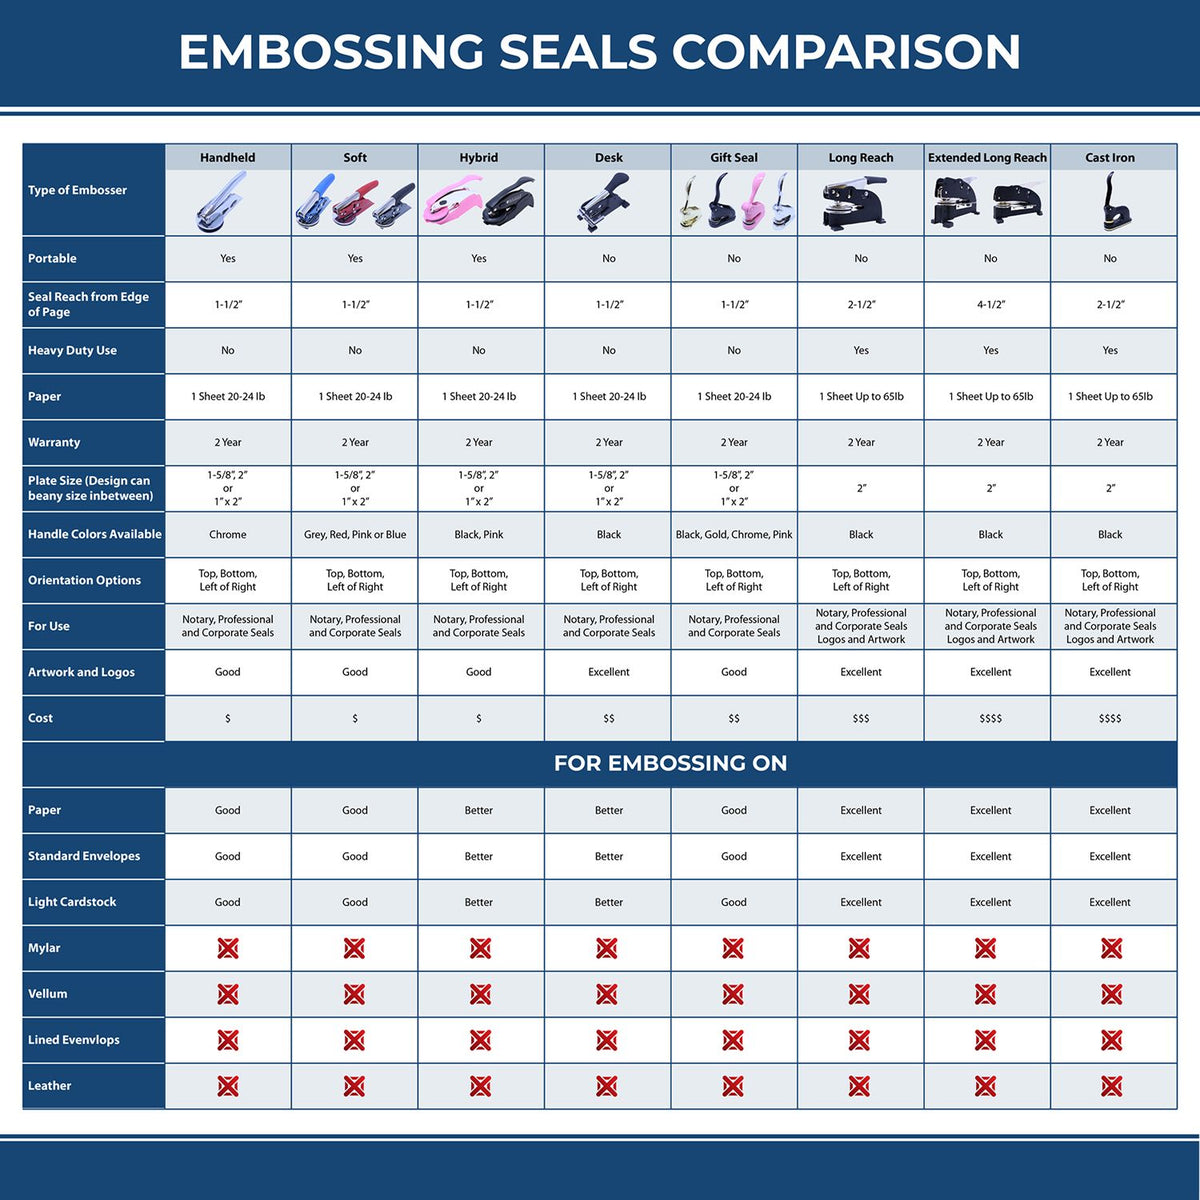 A comparison chart for the different types of mount models available for the Heavy Duty Cast Iron Missouri Land Surveyor Seal Embosser.